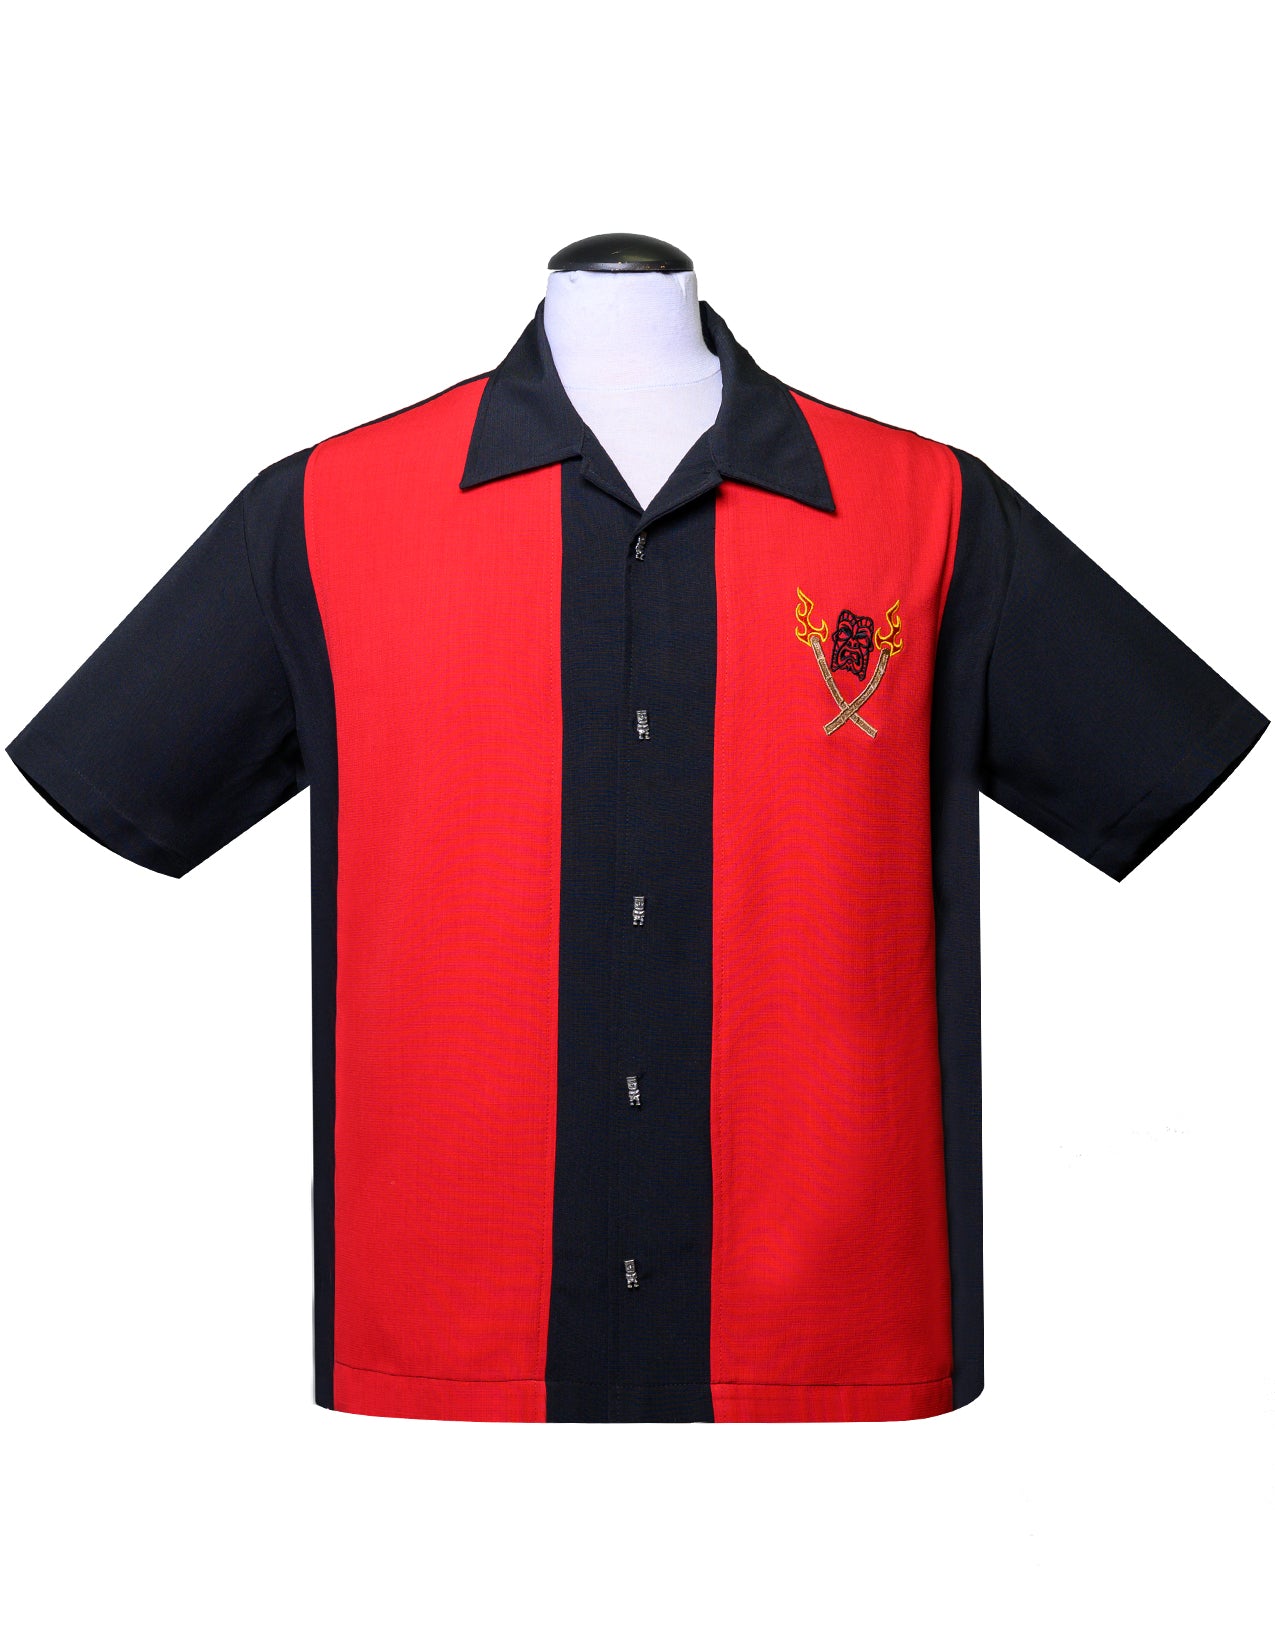 Shop Tropical Itch Bowling Shirt in Black/Red Online | Steady Clothing